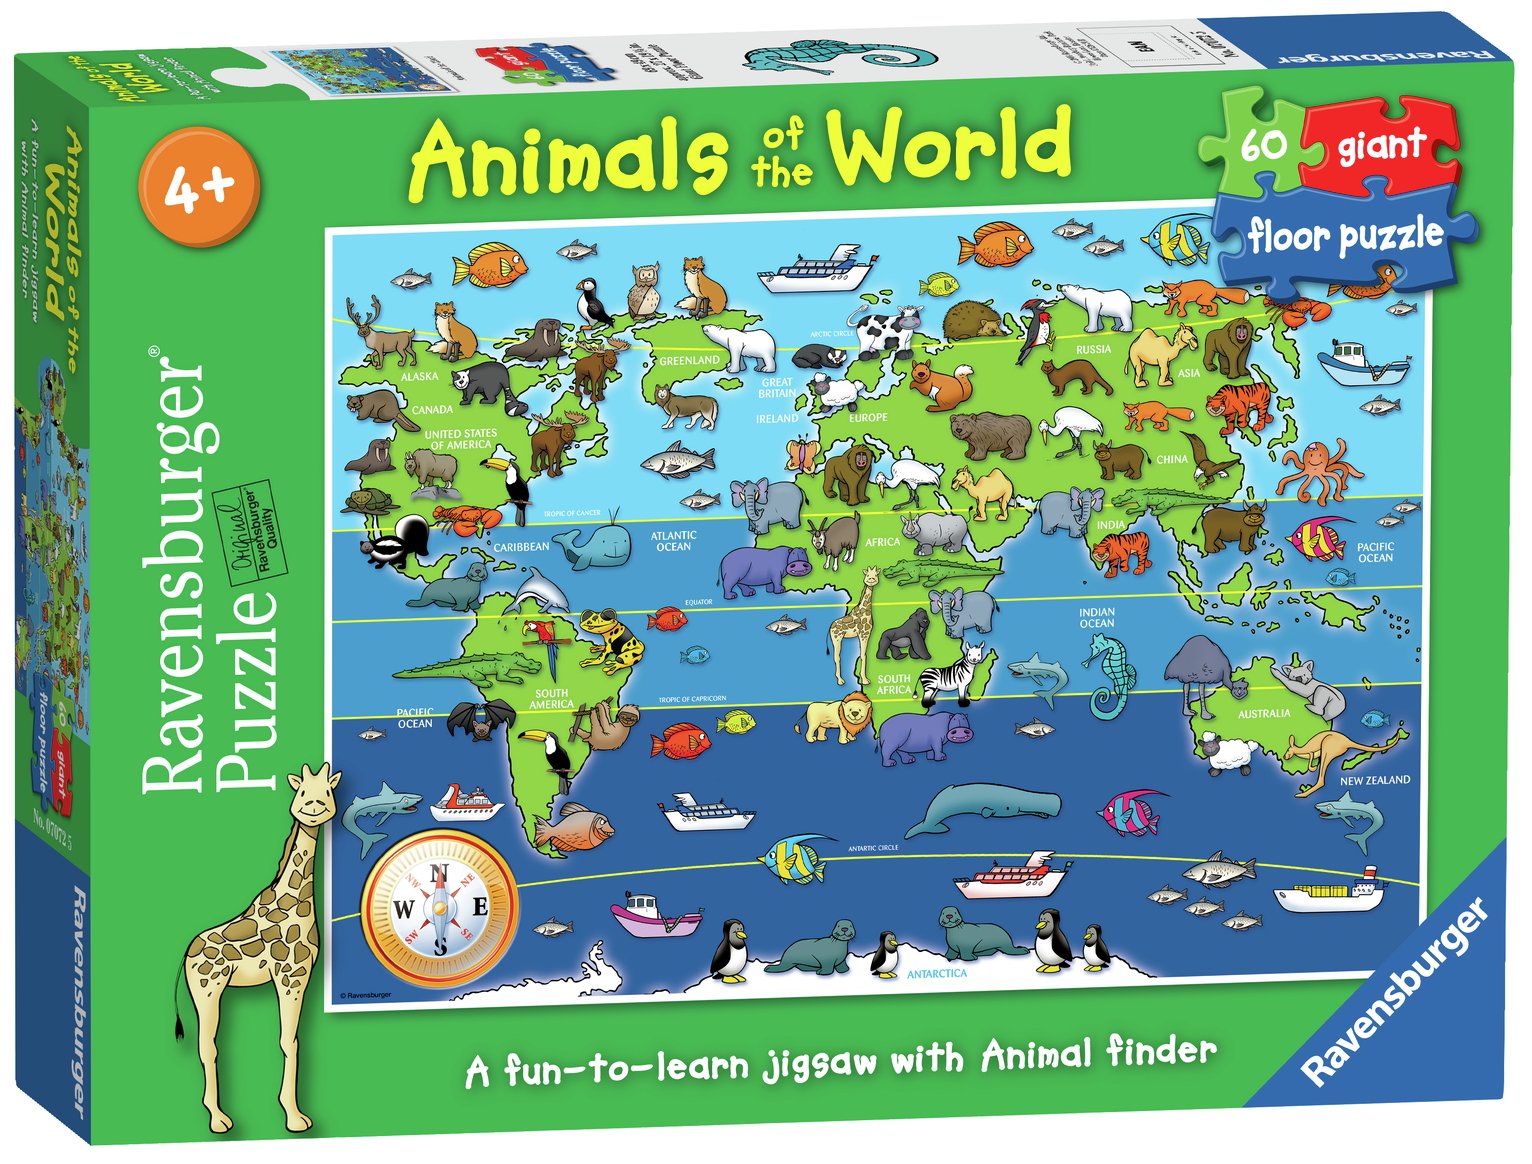 Animals of the World 60 Piece Floor Puzzle Review